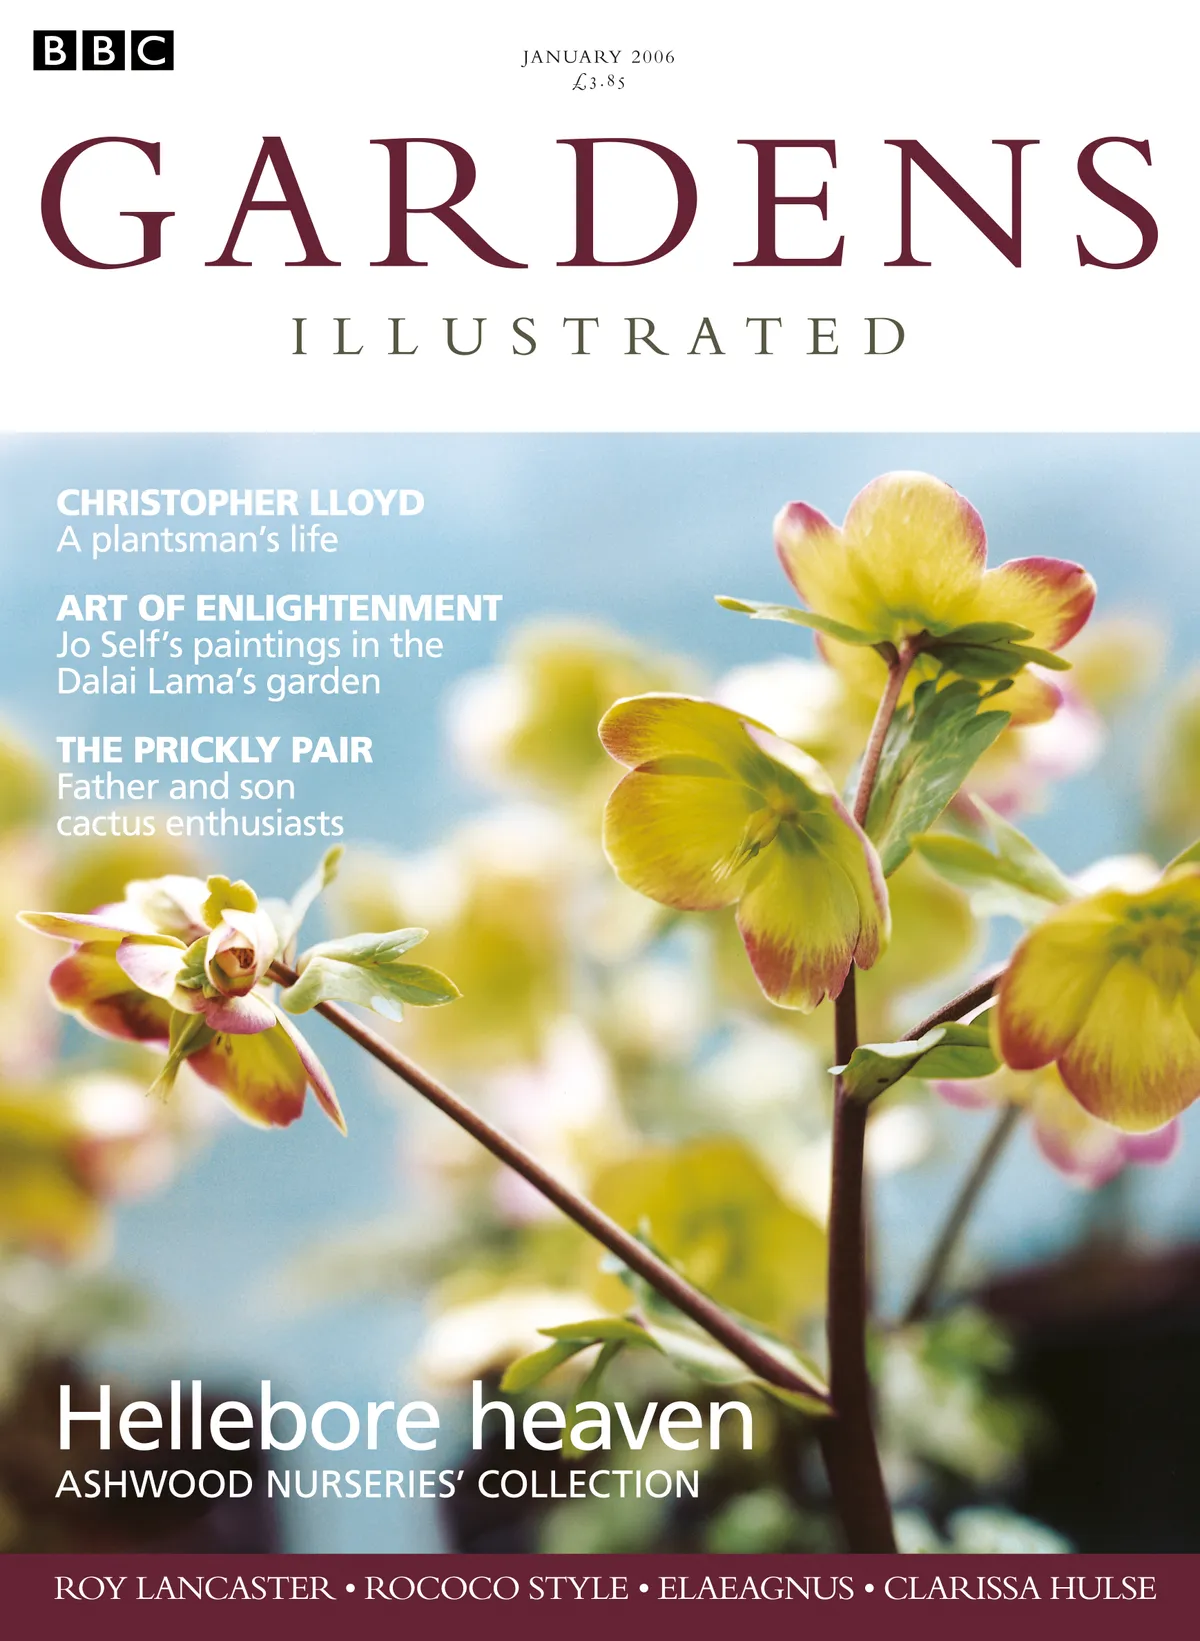 Gardens Illustrated issue 109 cover